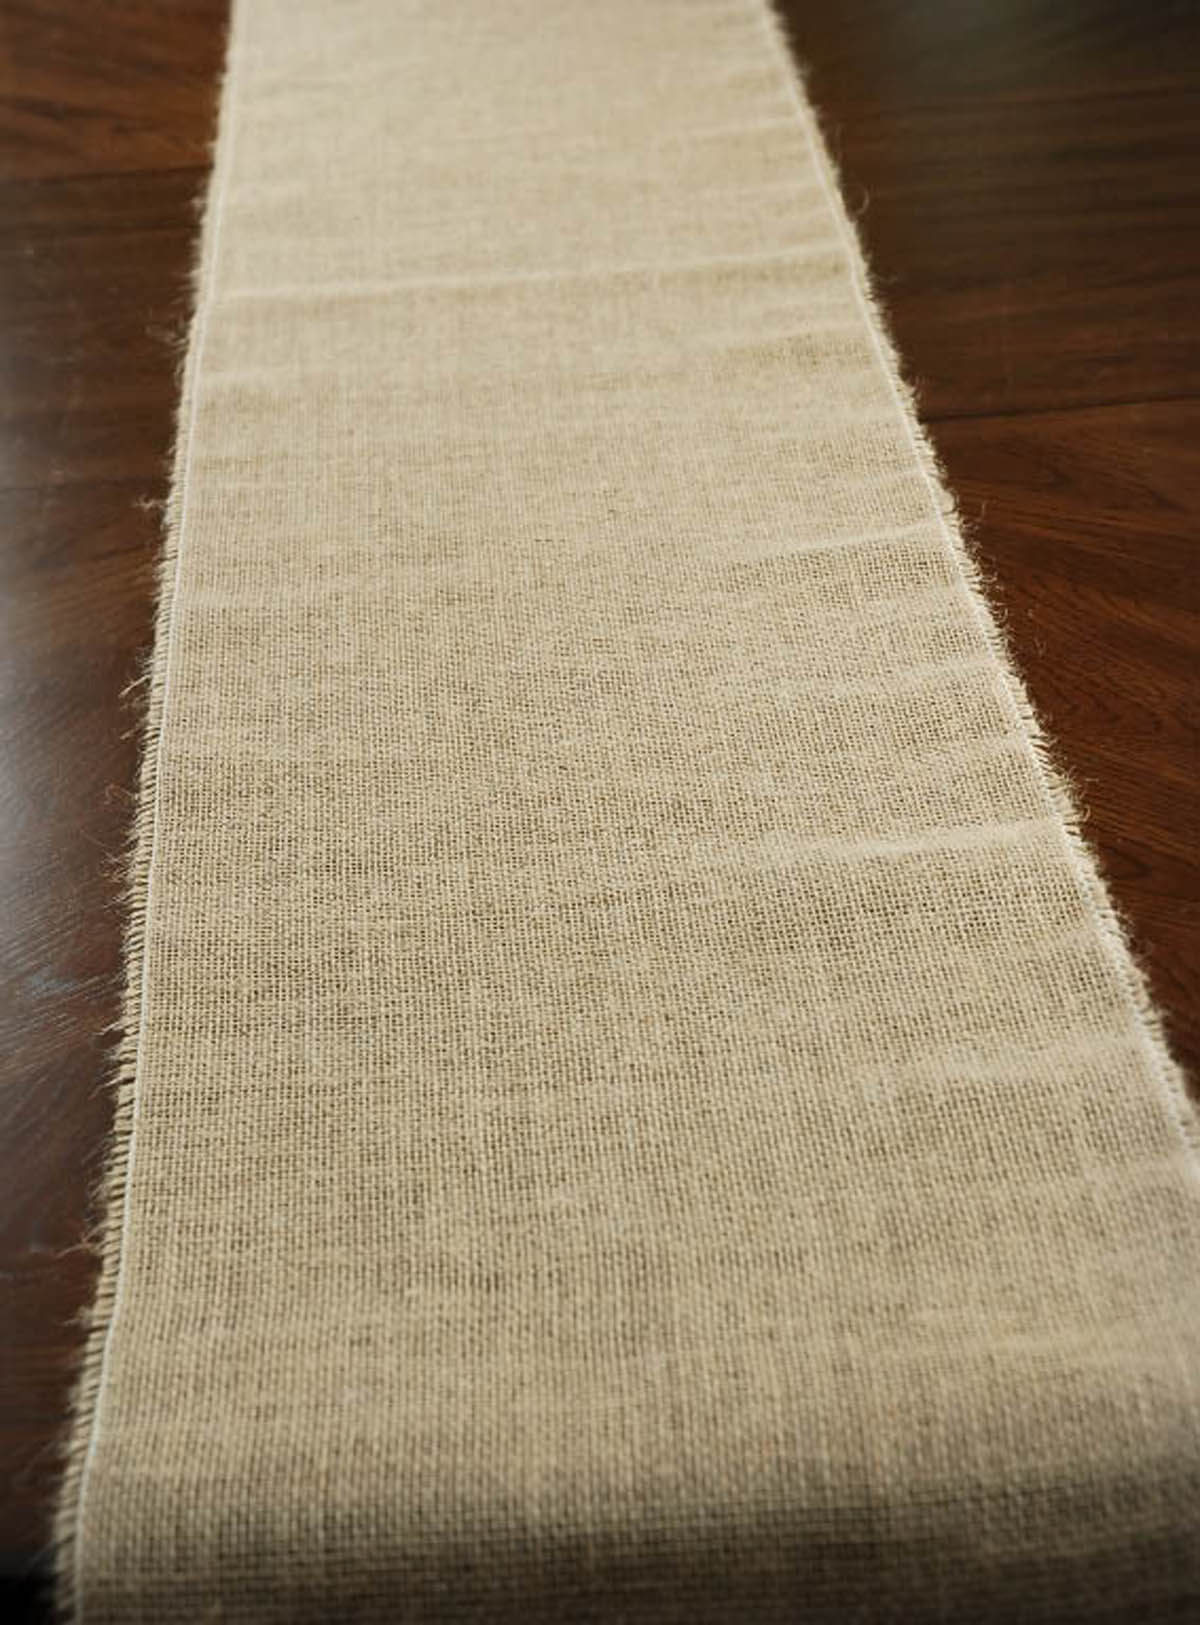 Burlap Table Runner - 100% Jute -50% OFF|Save On Crafts